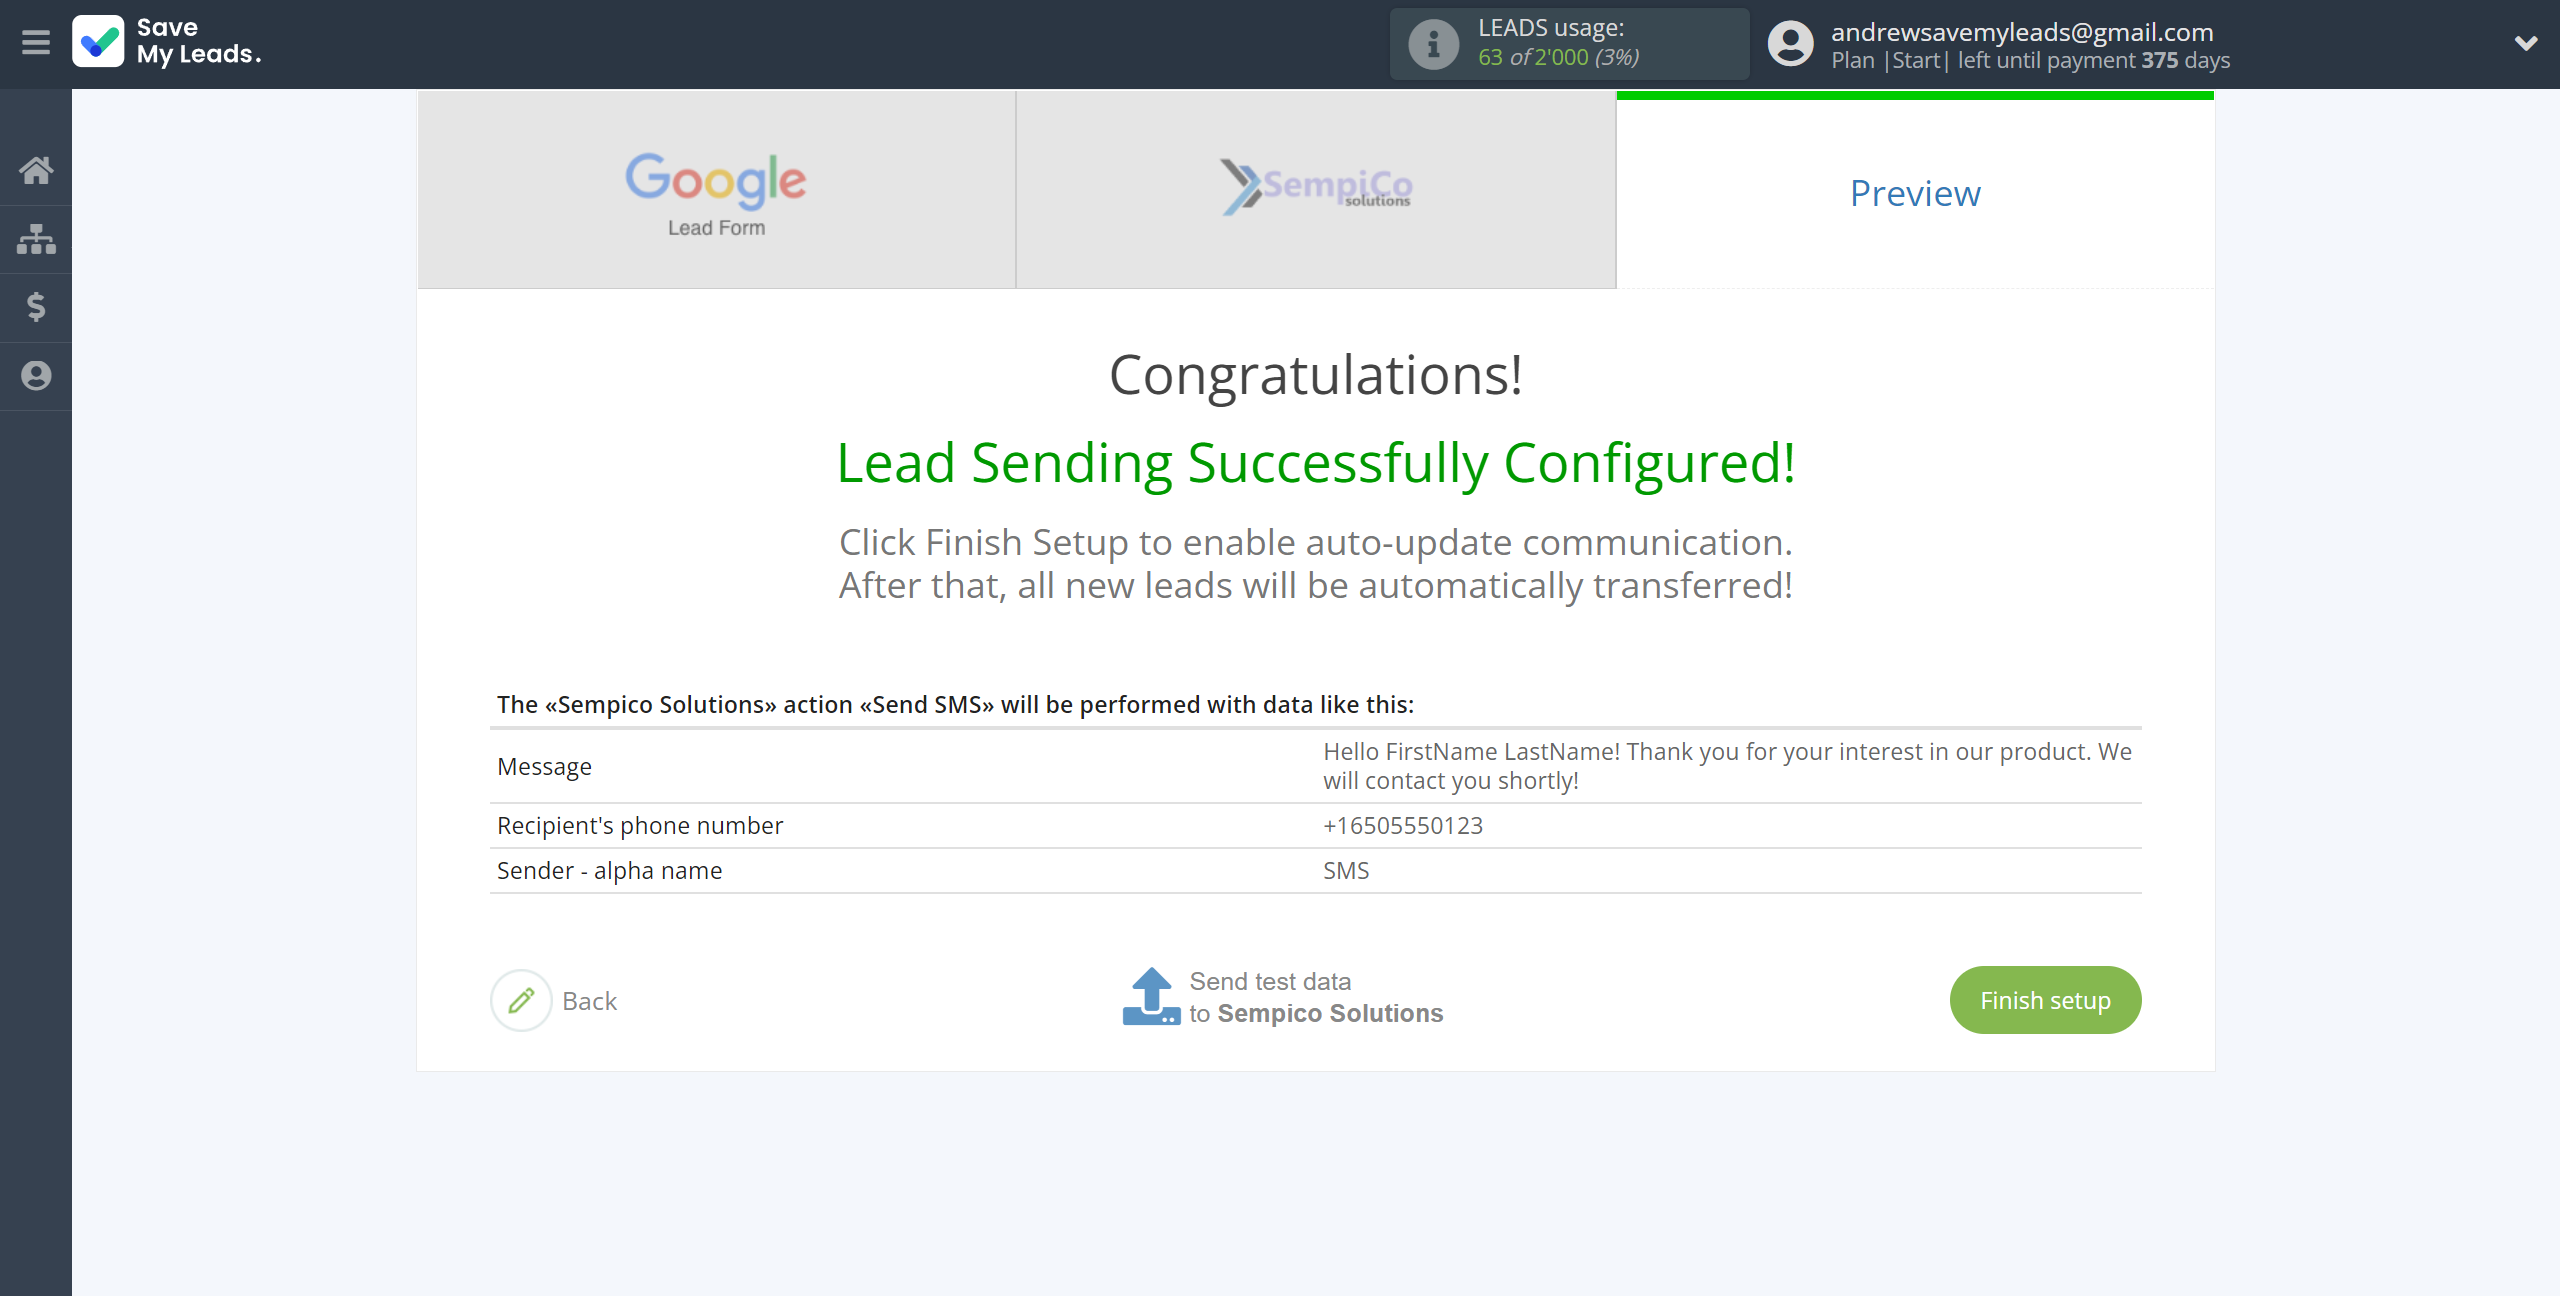 How to Connect Google Lead Form with Sempico Solutions | Test data